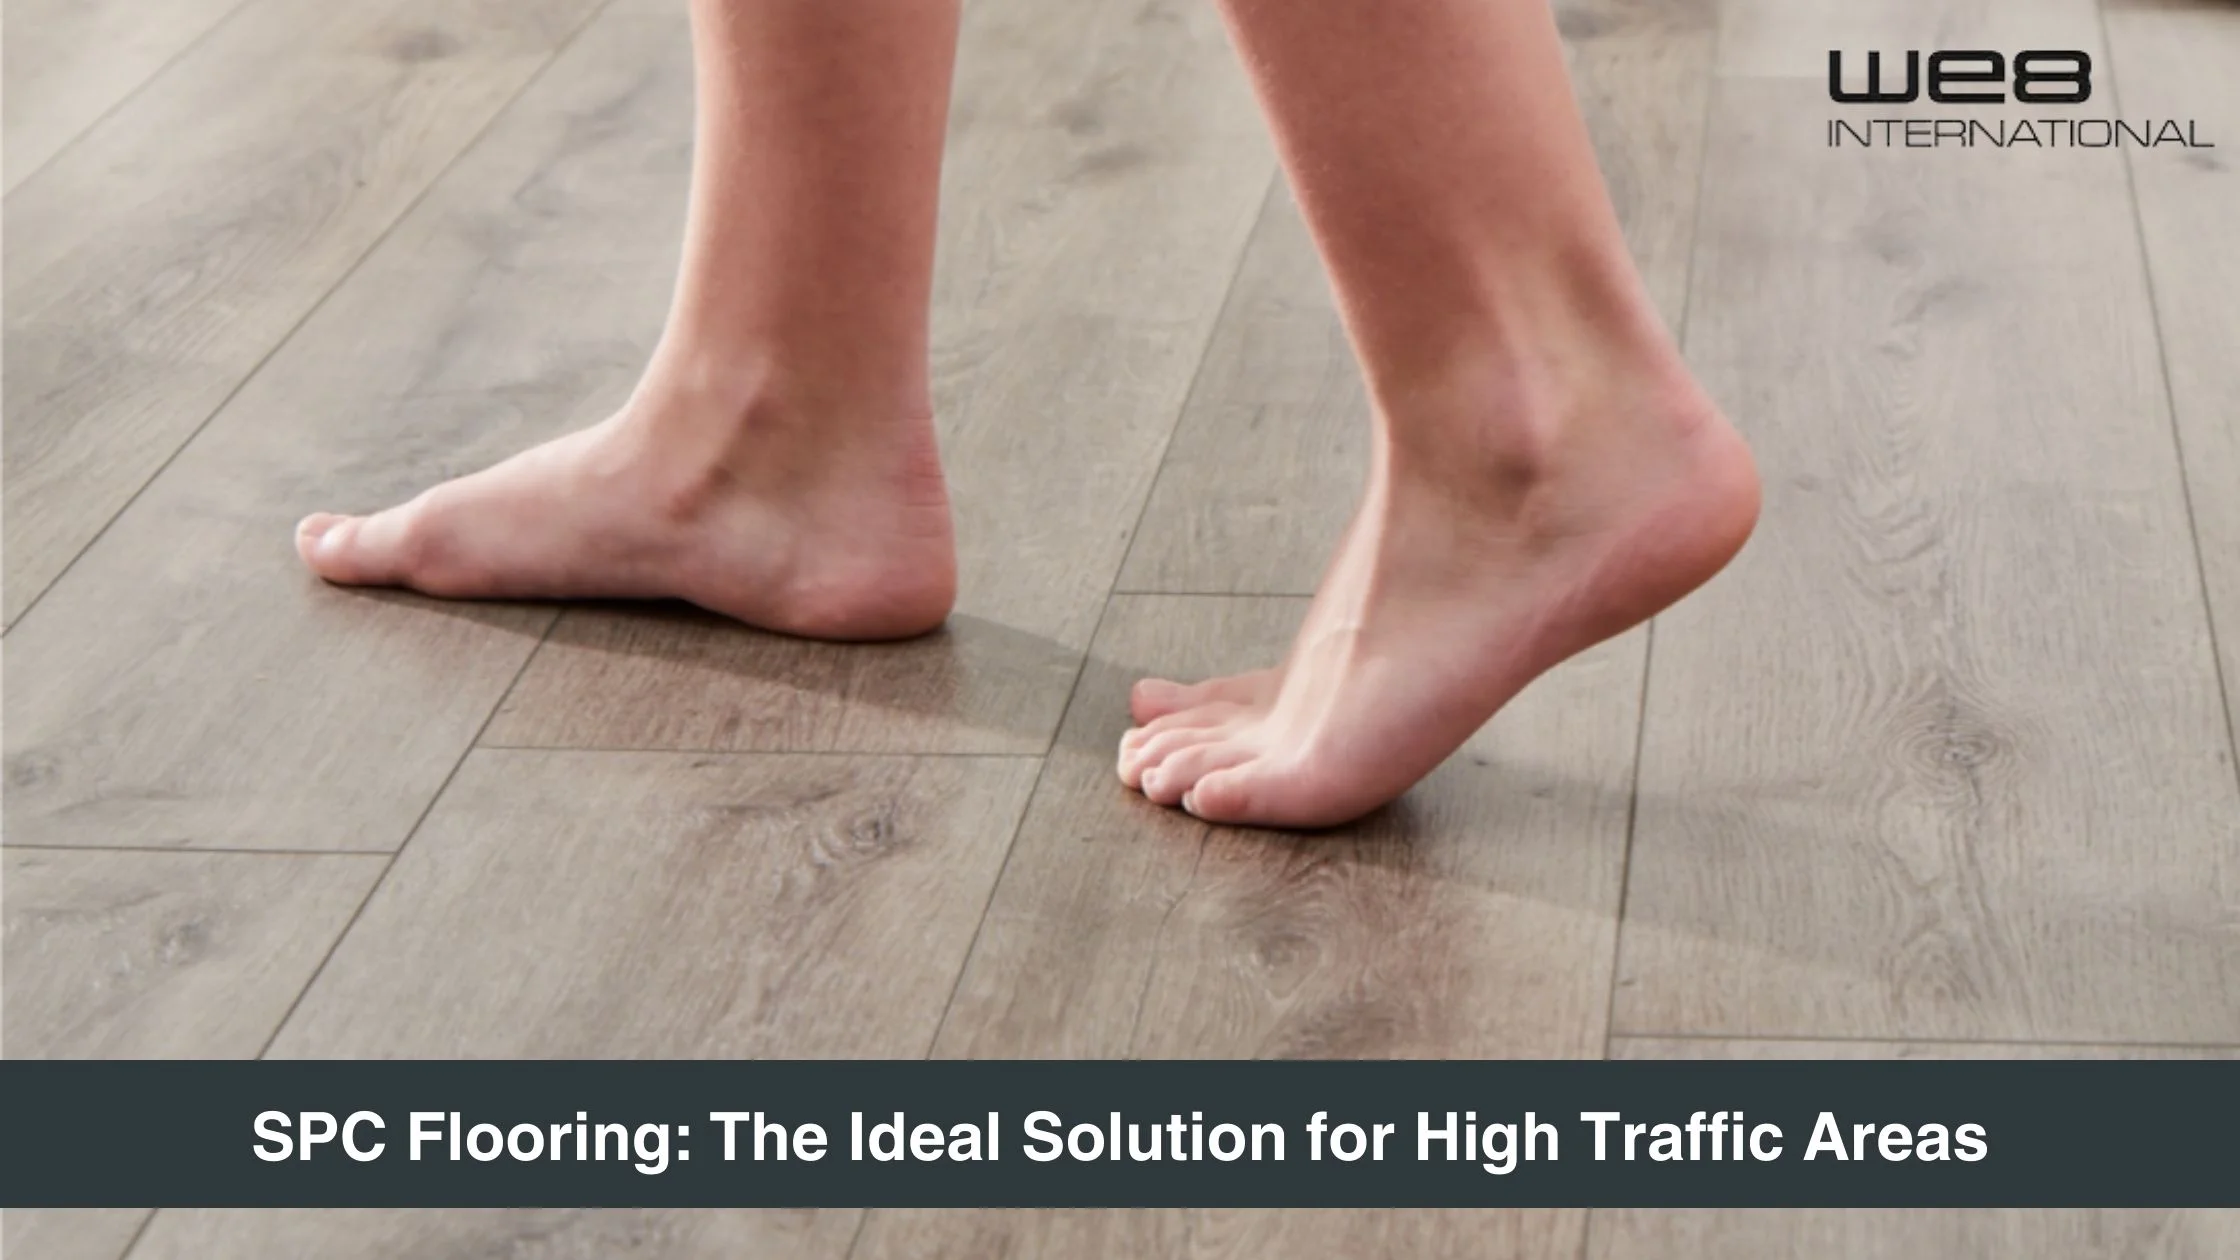 SPC Flooring: The Ideal Solution for High Traffic Areas